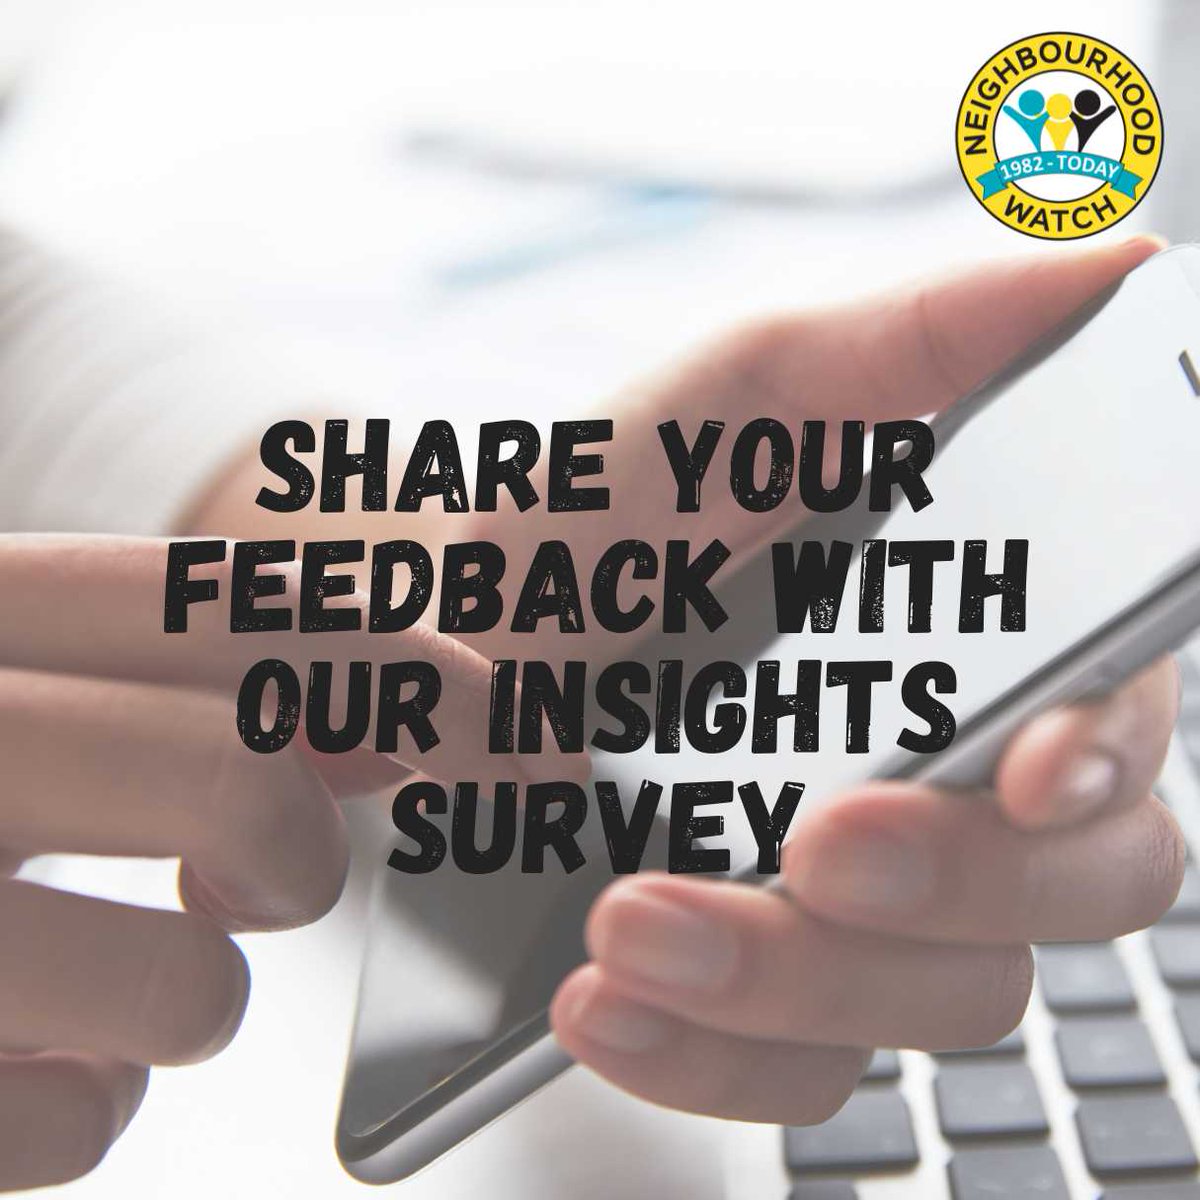 📢 Our Insights Survey 2024 is now open! We're excited to hear your feedback on how you view Neighbourhood Watch, and how we can improve. The survey is open from today - Friday 3rd May. 👉 Complete the survey here: surveymonkey.com/r/8GXS6VW